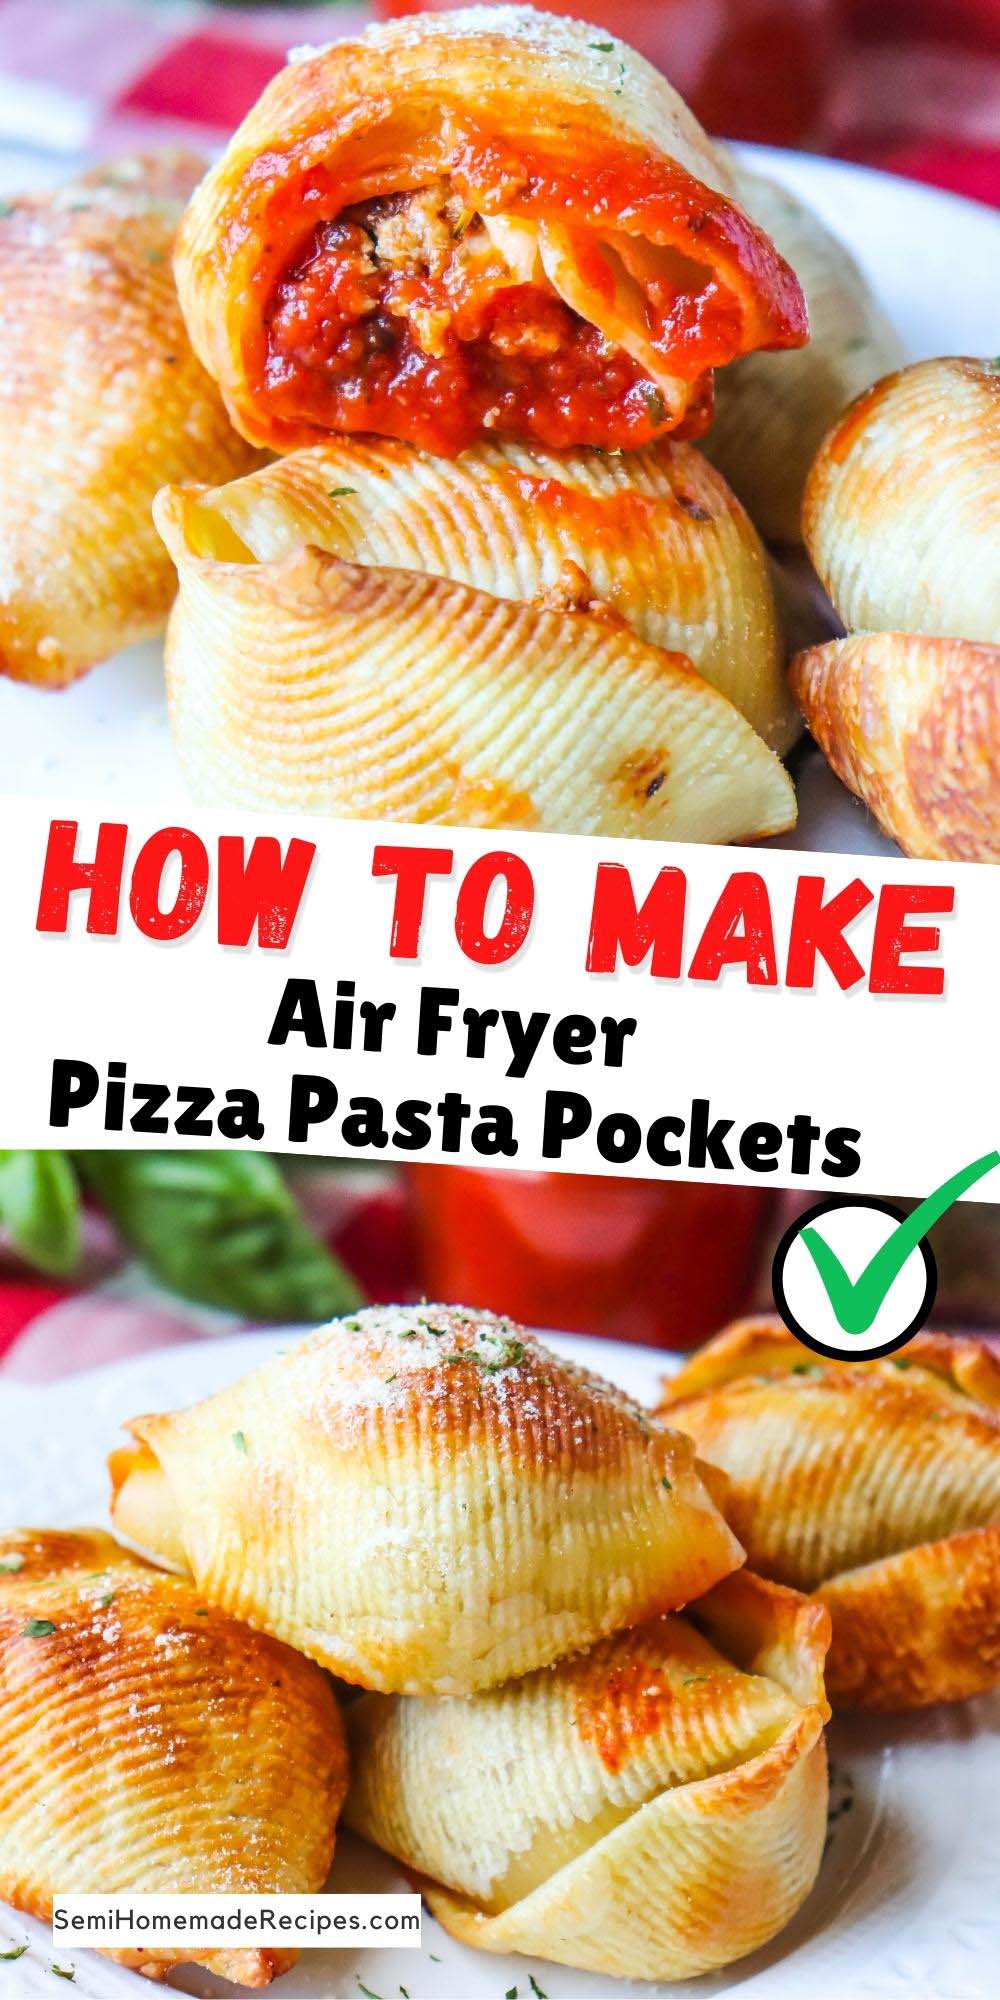 Air Fryer Pizza Pasta Pockets - Crispy Shells stuffed with ground beef or ground turkey, pizza sauce and fresh mozzarella pearls! Top these Pizza pockets with parmesan cheese and parsley before dunking them into pizza sauce for a great appetizer, dinner or snack! 